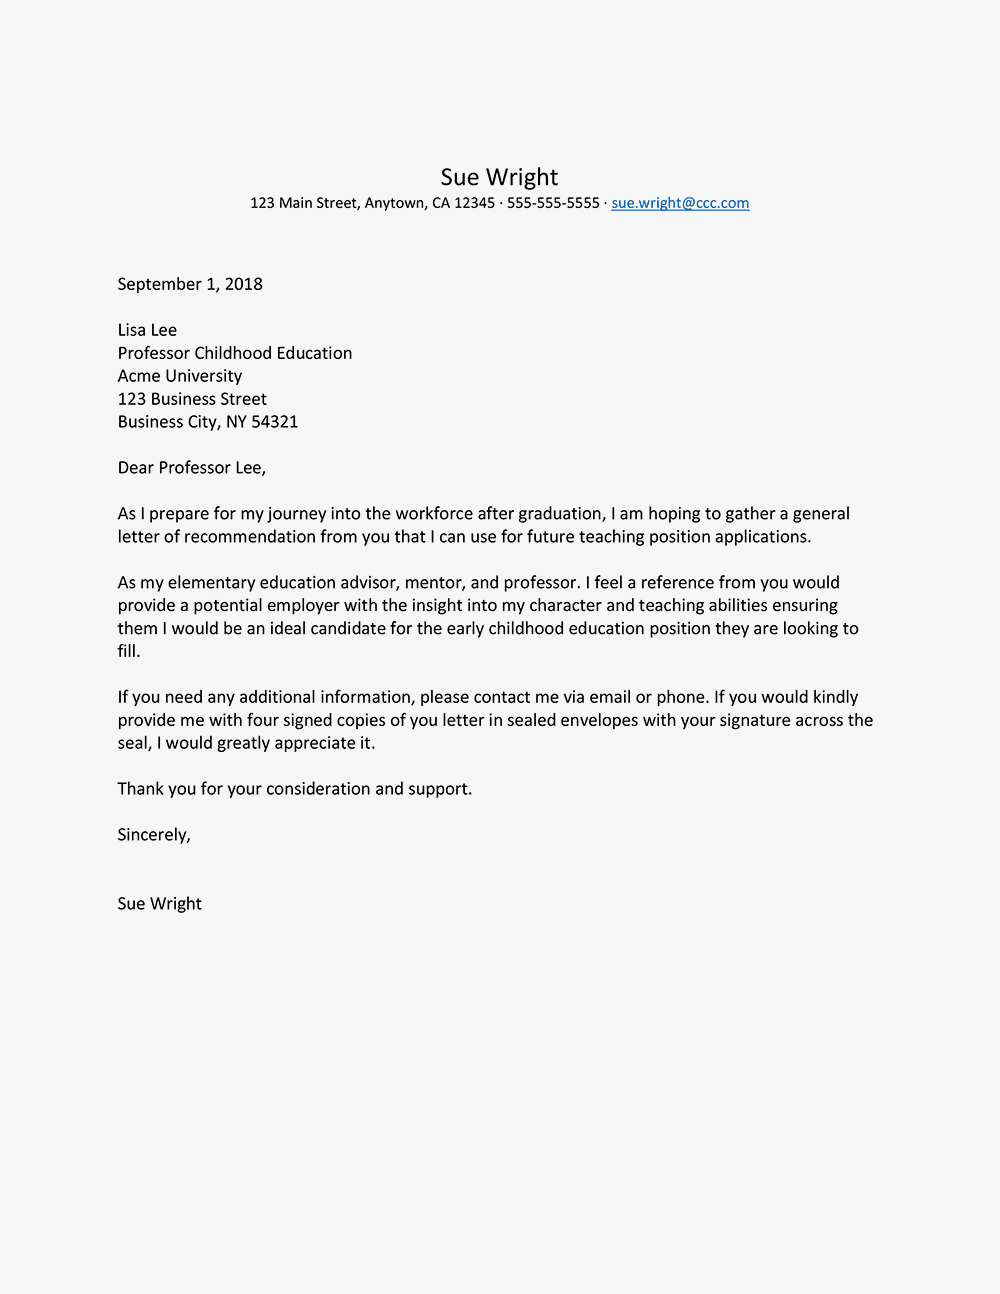 Fresh General Letter Of Recommendation Sample Download intended for dimensions 1000 X 1294